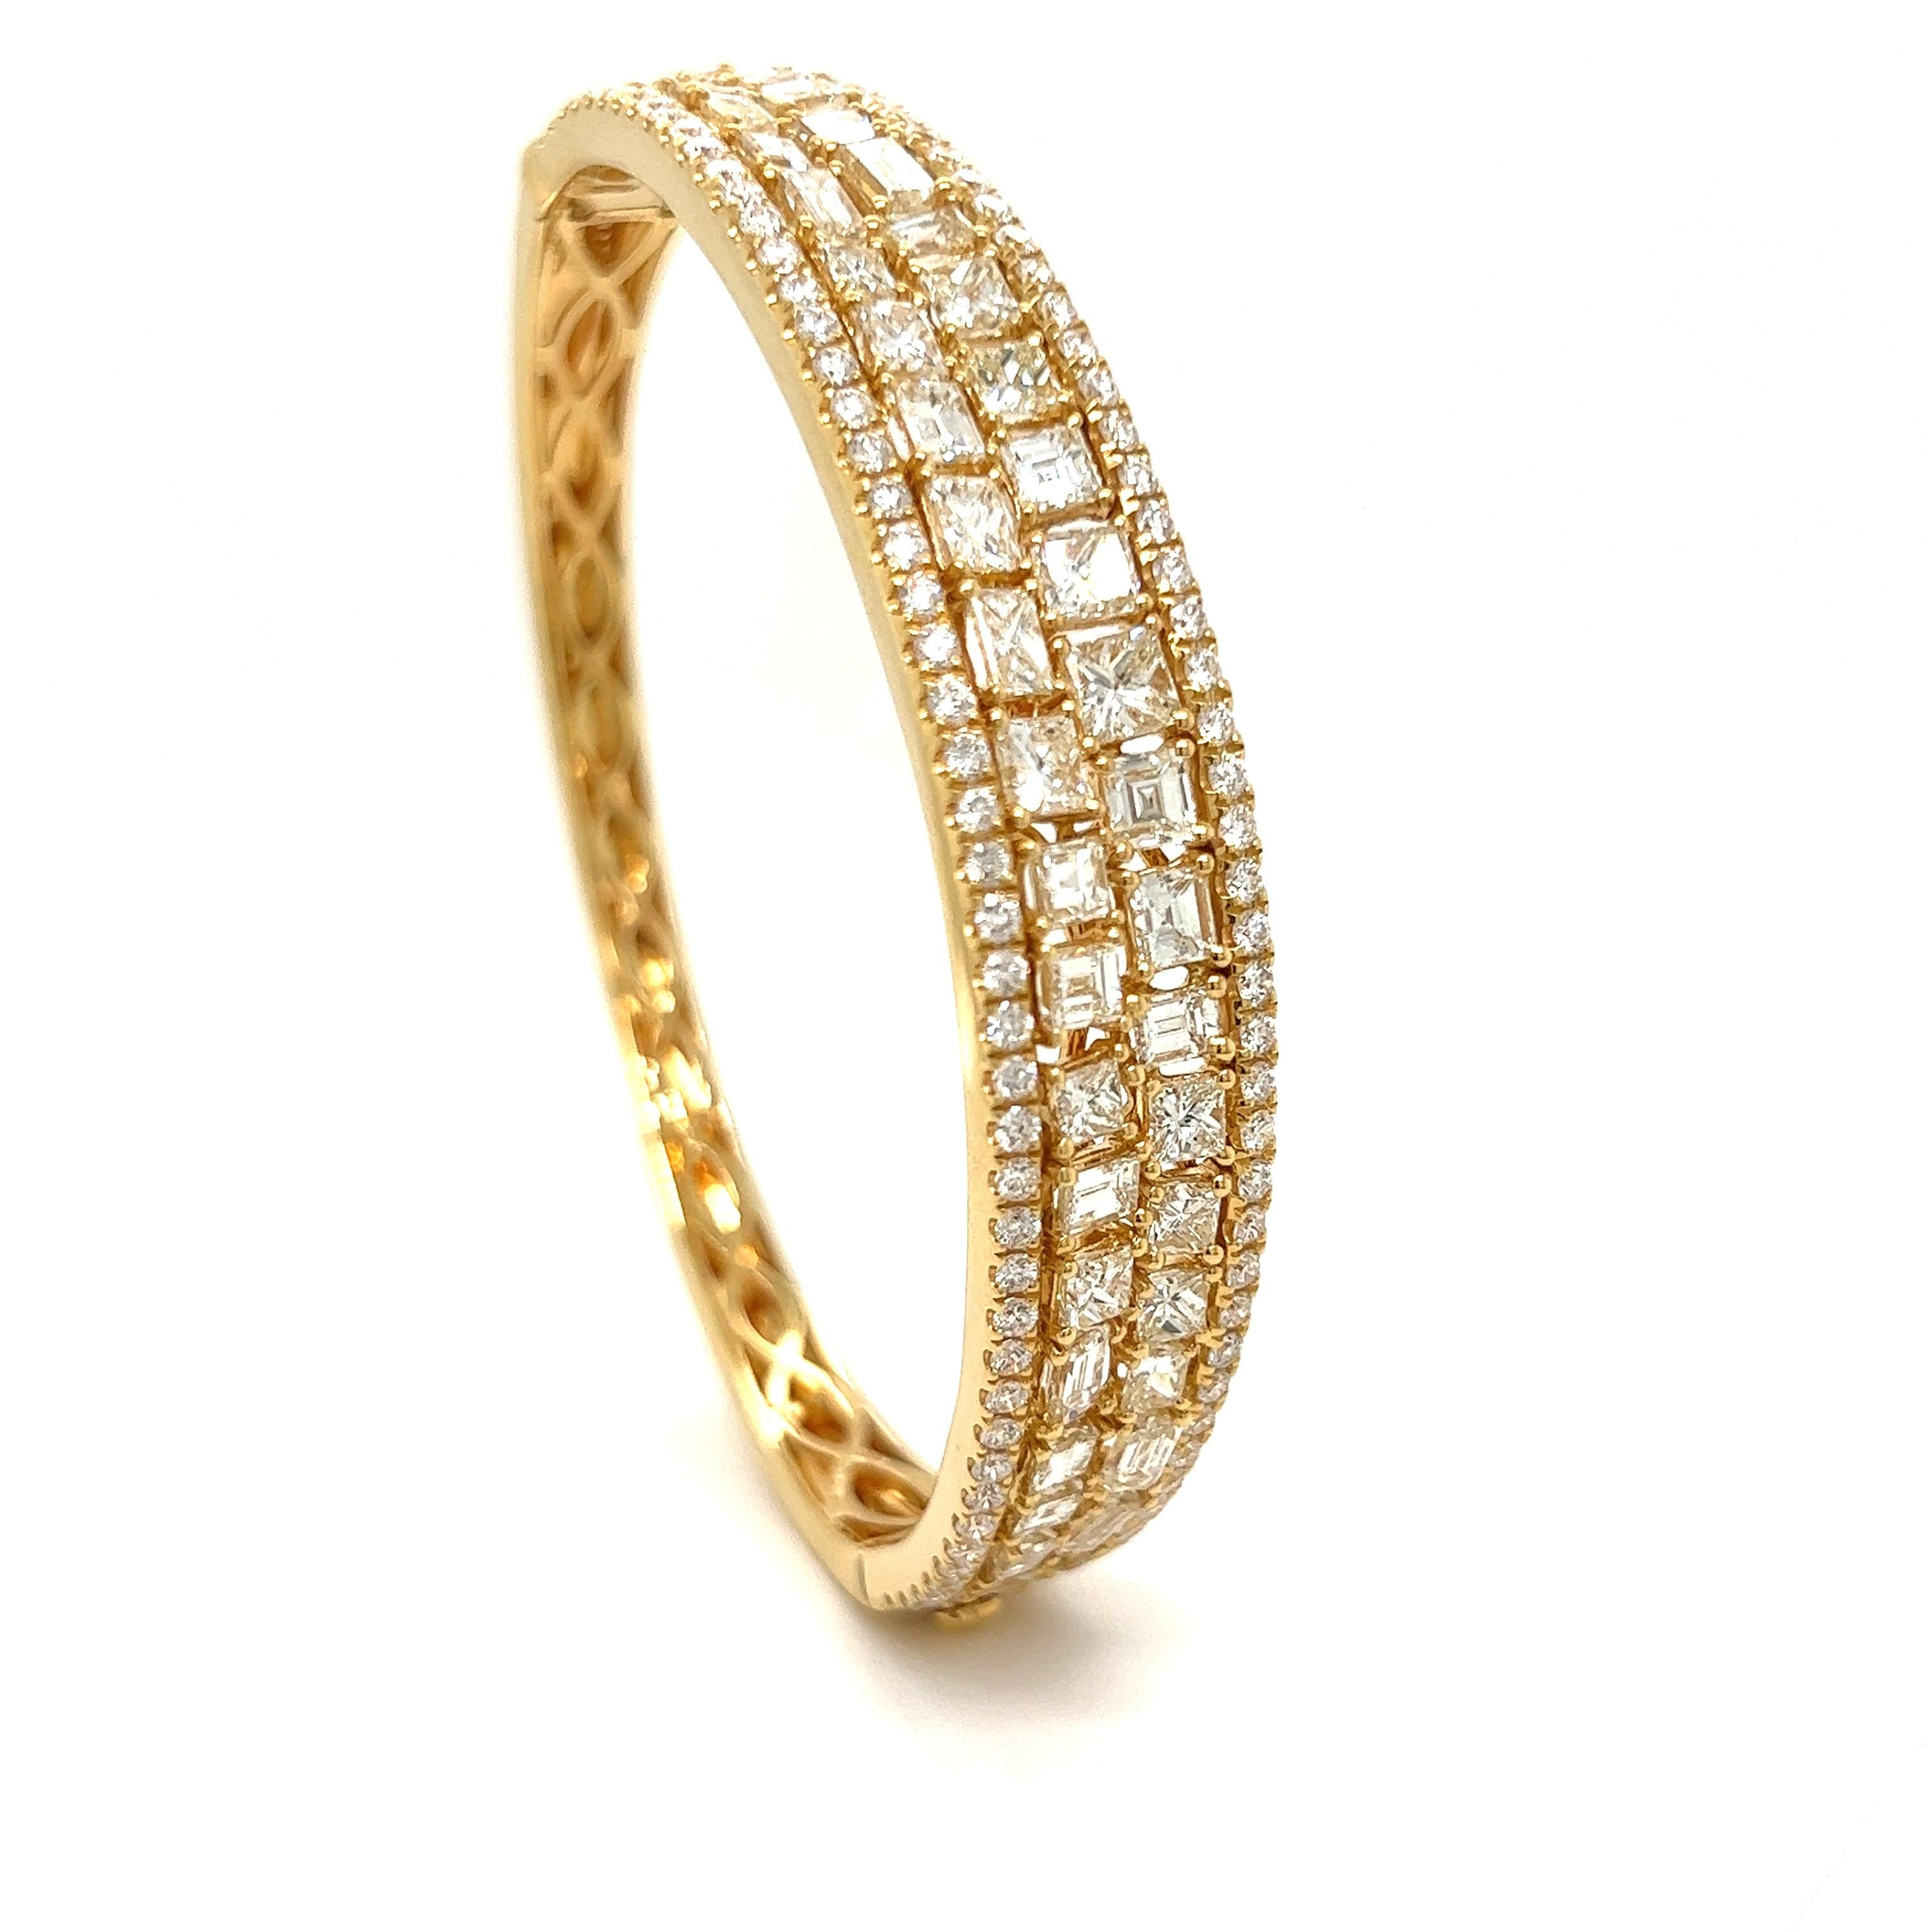 Exquisite designer diamond bangle.  Asscher, round, baguette and princess cut diamonds are expertly crafted into this marvelous bangle.  A total of 9.05 cttw in VS-SI clarity and G-H color diamonds set in 18K yellow Gold.  167 diamonds make this